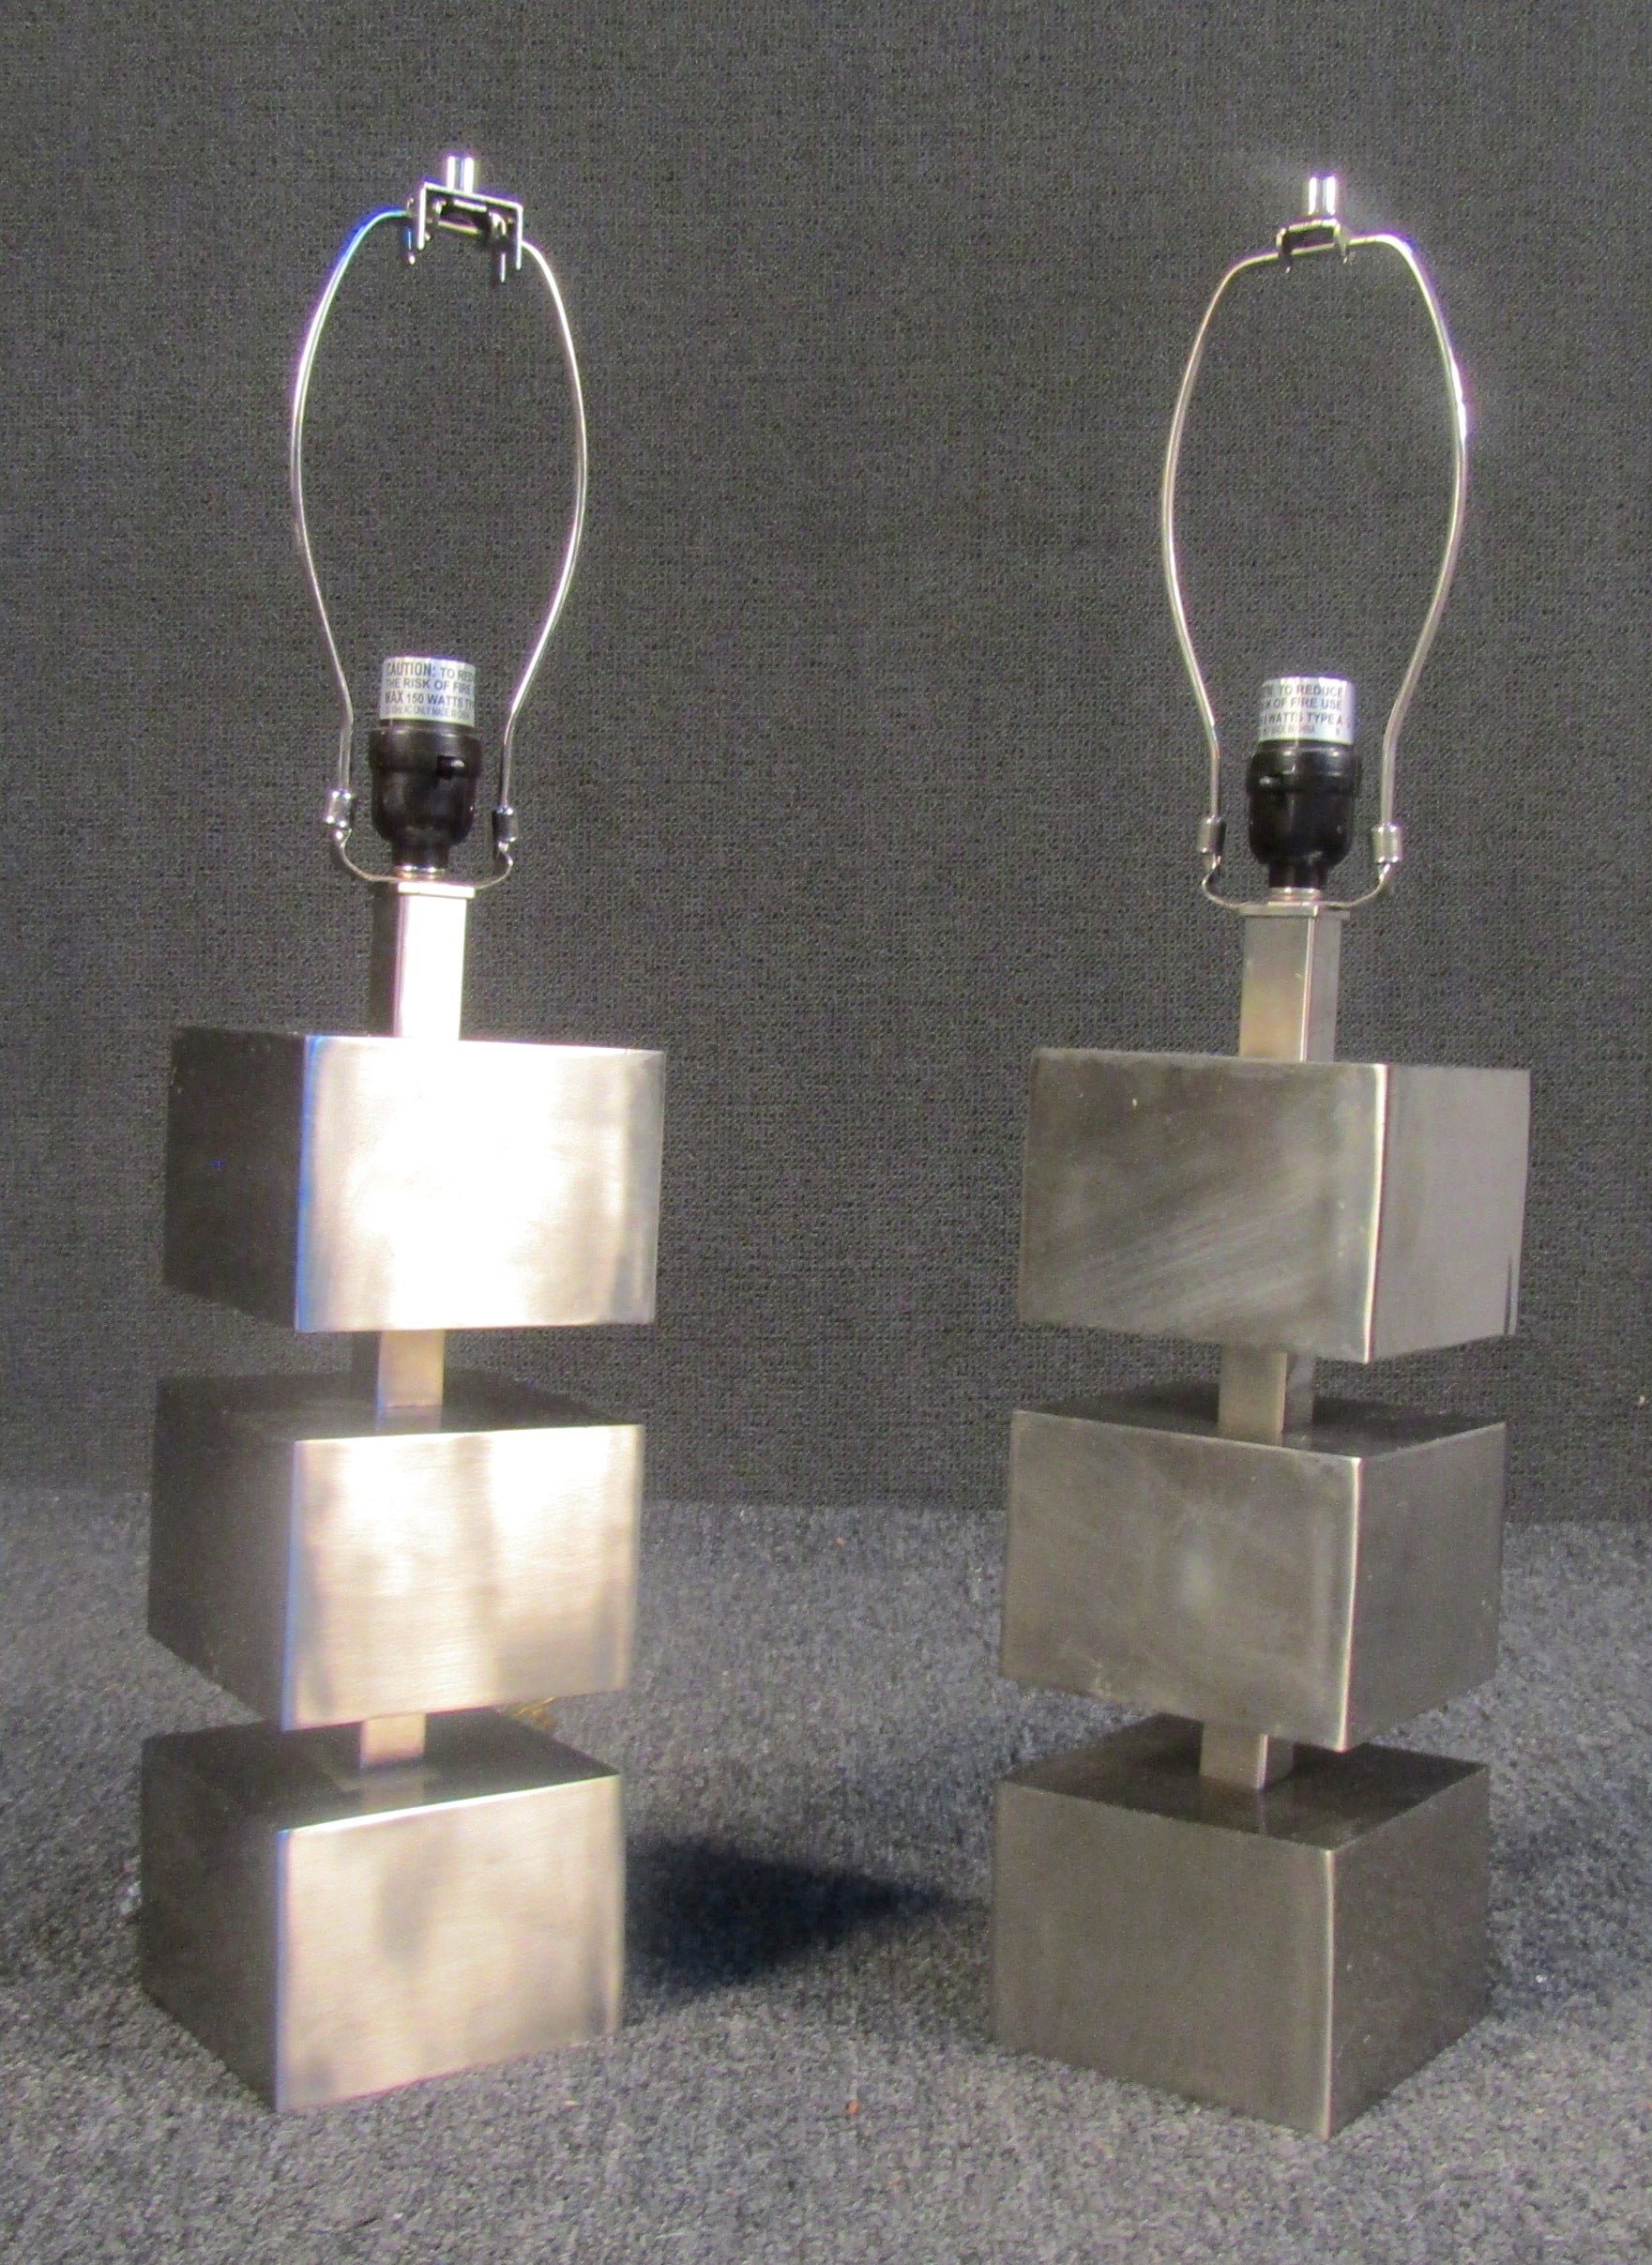 Unique mid-century brushed metal block lamps. These striking lamps provide the perfect blend of industrial aesthetic with the brushed metal, and sleek modern design with the stacked cube forms. These lamps would make a beautiful addition to any